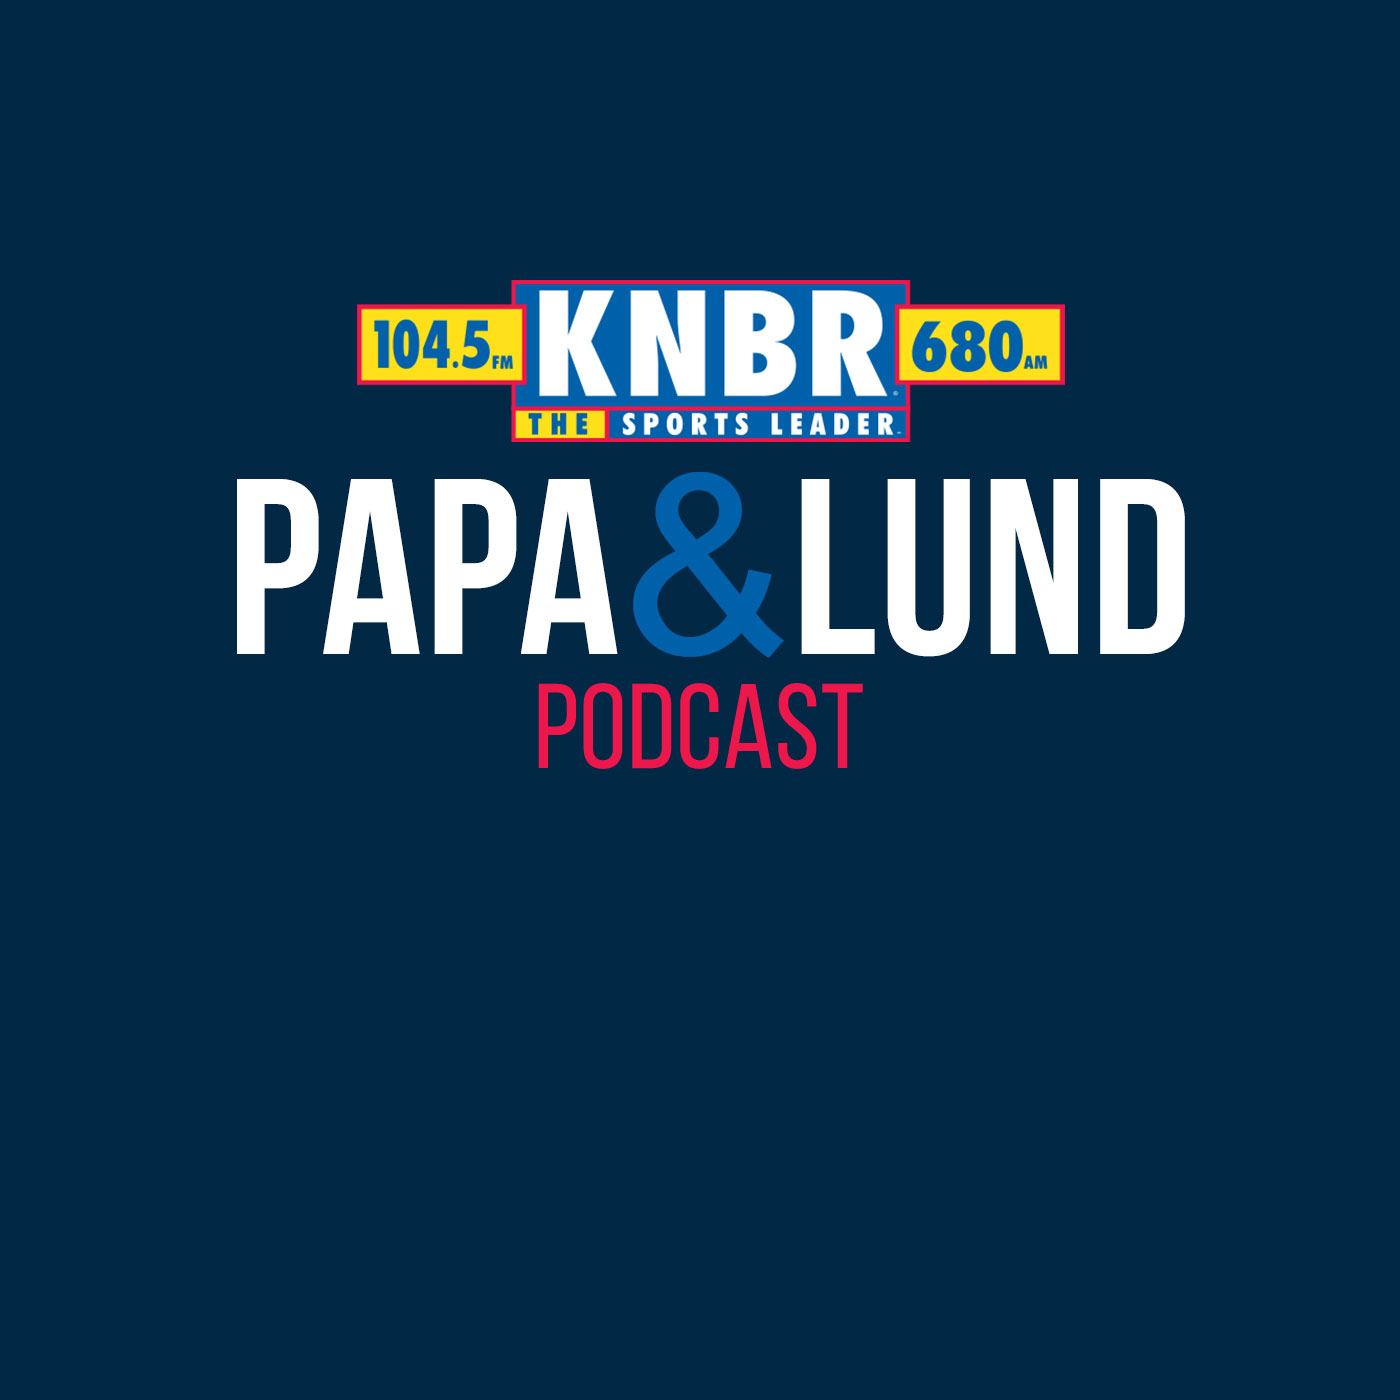 6-29 Pat Burrell joins Papa & Lund to discuss the hitting development of some of the young Giants and how they can be difference makers beyond this season